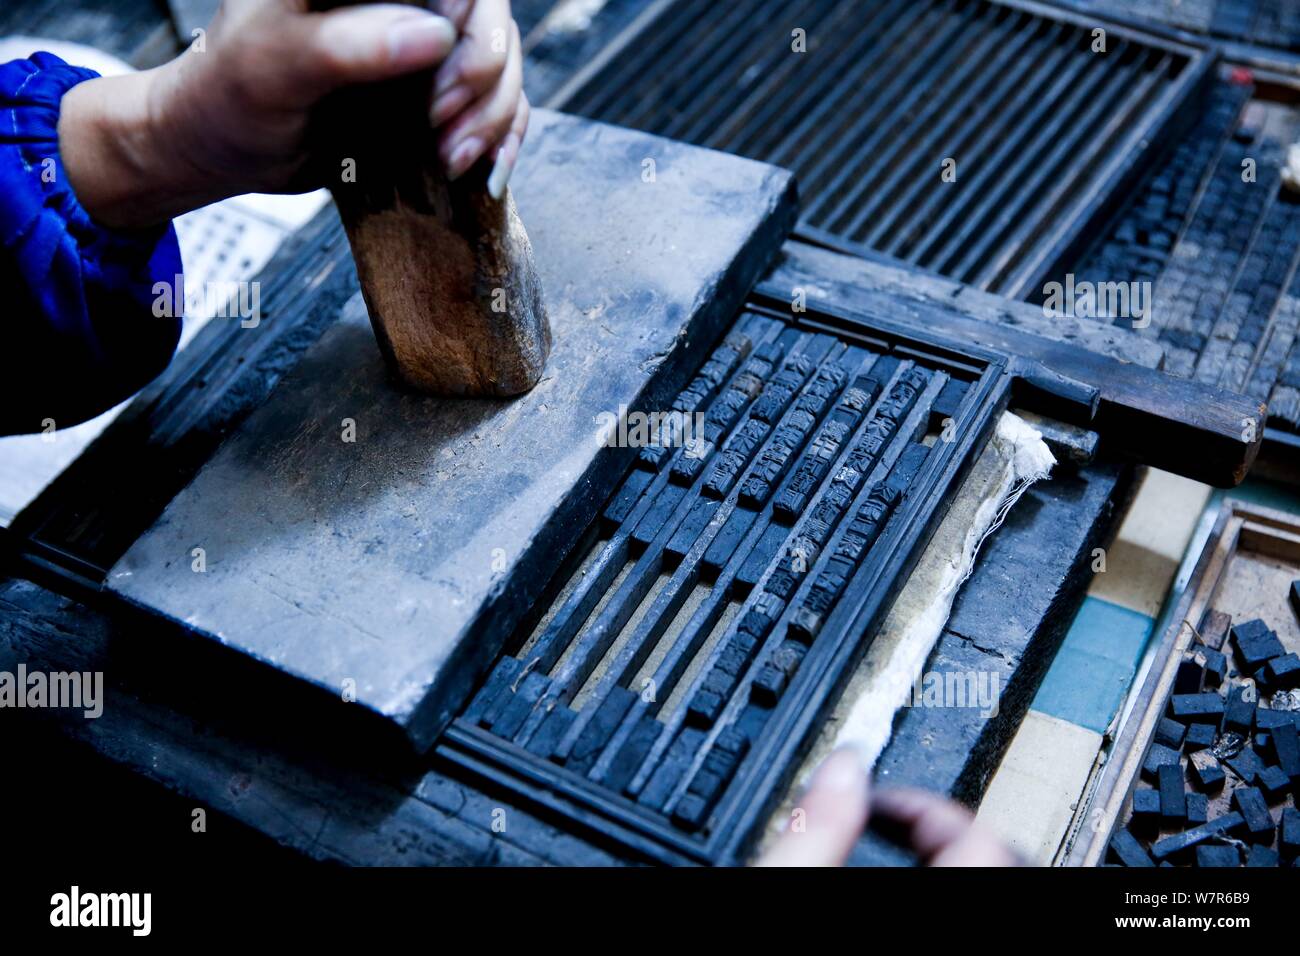 Chinese craftsman Xiao Shihua prepares to print through a wood typehead plate for movable type printing in Zhulin village, Tantou town, Shaoyang city, Stock Photo